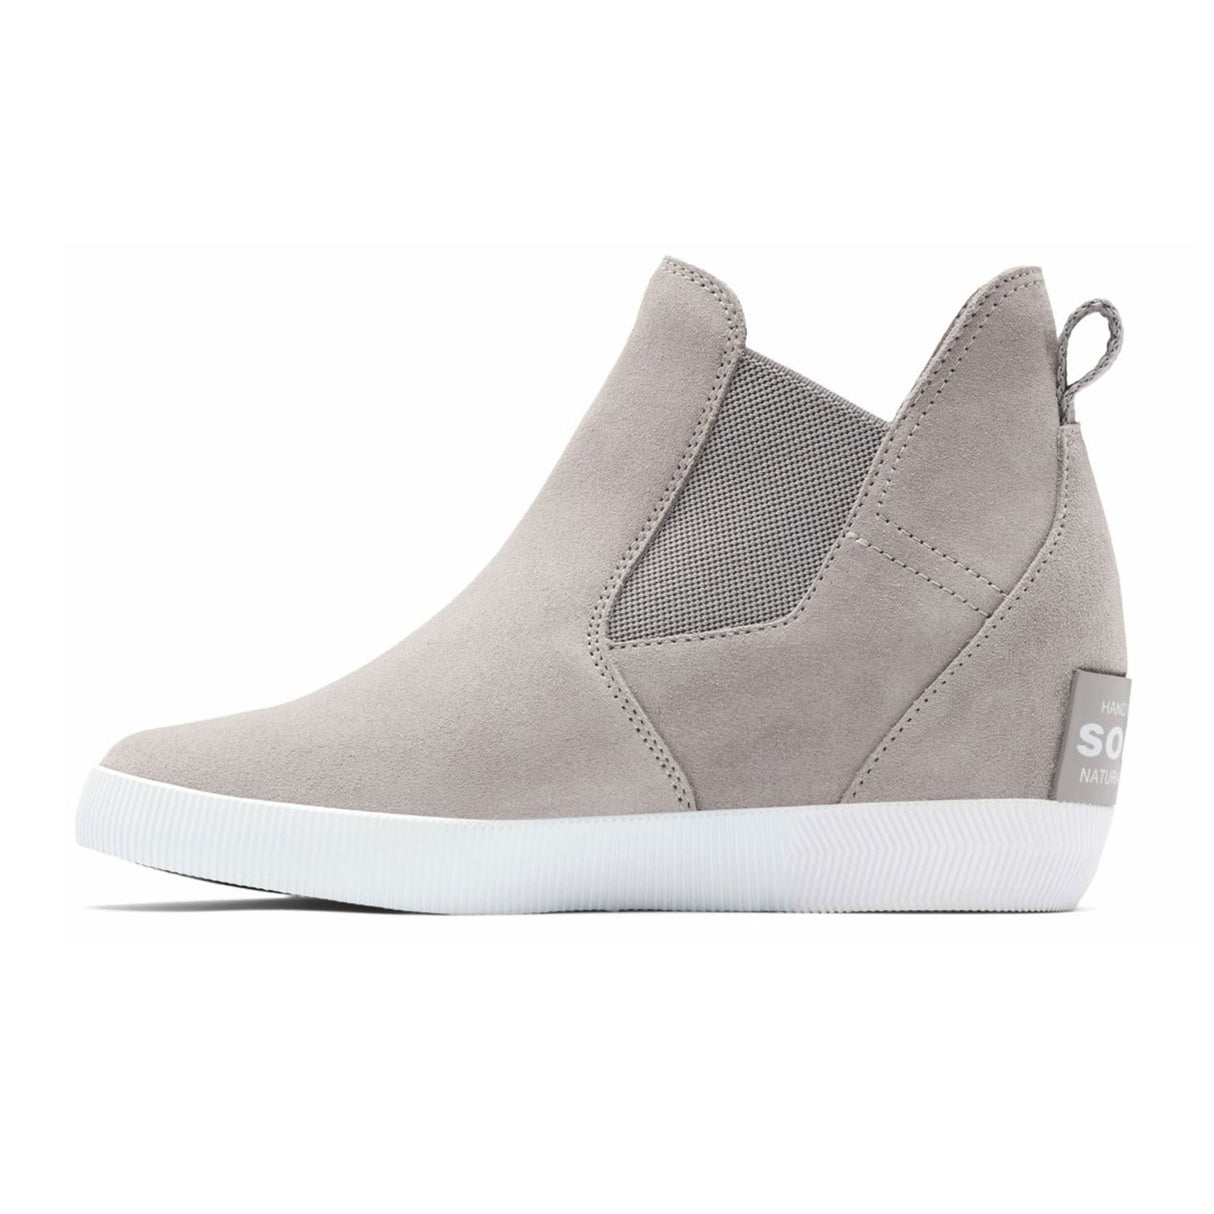 Sorel Out N About Slip On Wedge Ankle Boot (Women) - Chrome Grey/White Boots - Casual - Low - The Heel Shoe Fitters